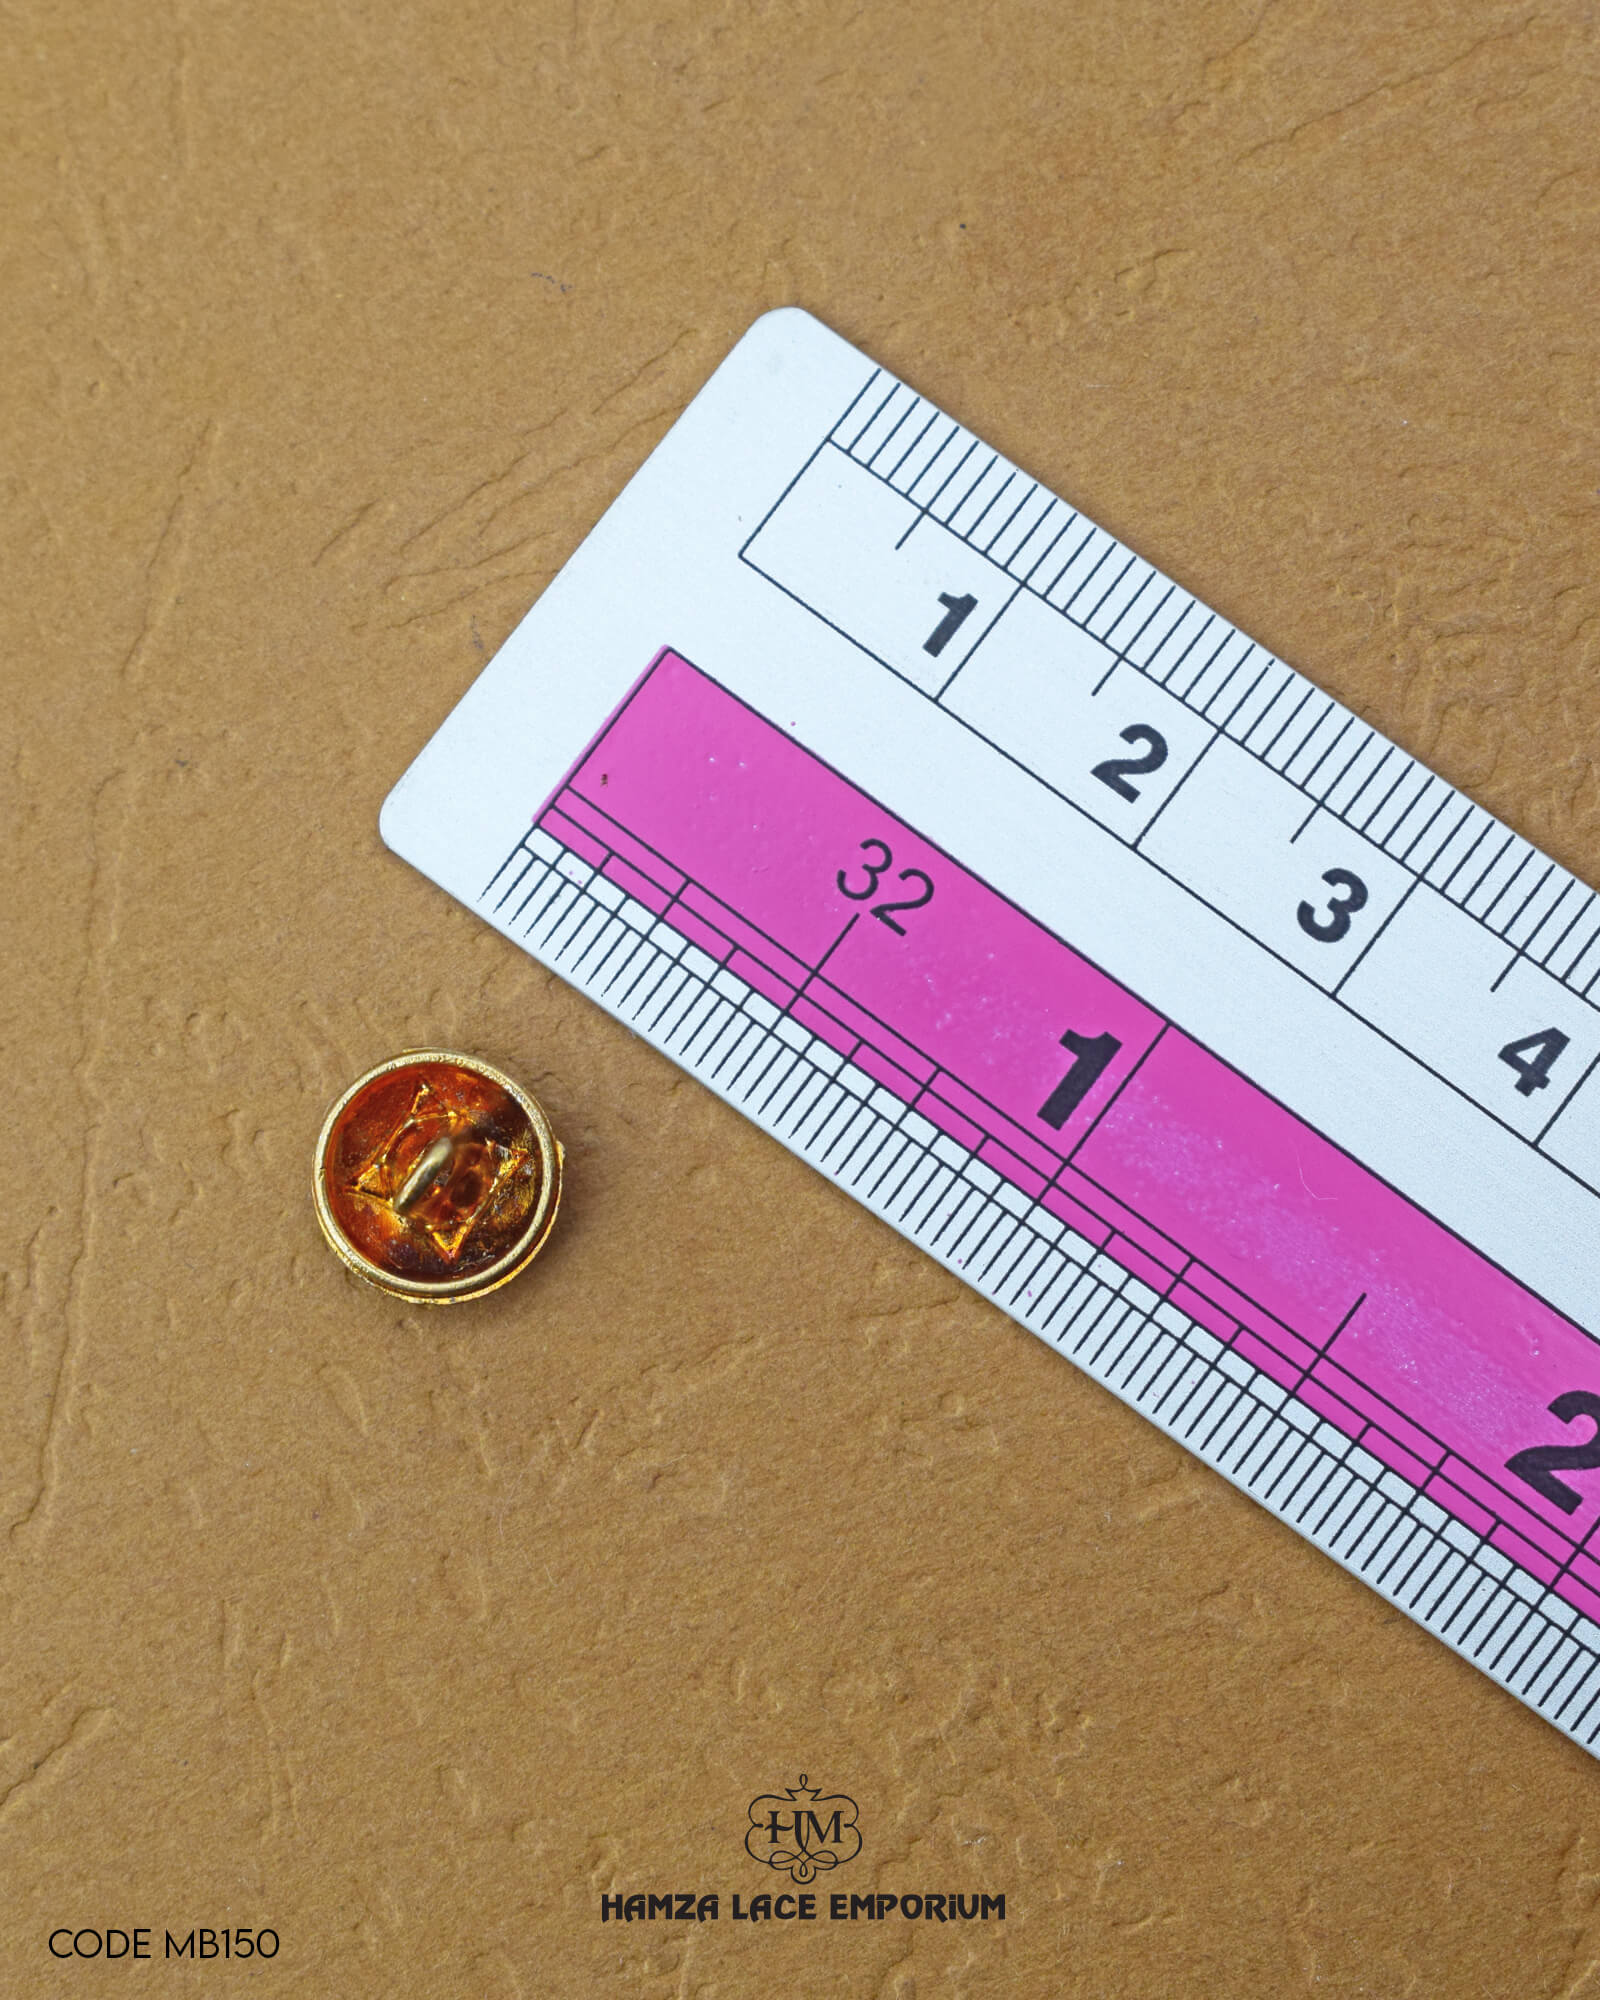 The size of the 'Metal Button MB150' is measured by using a ruler